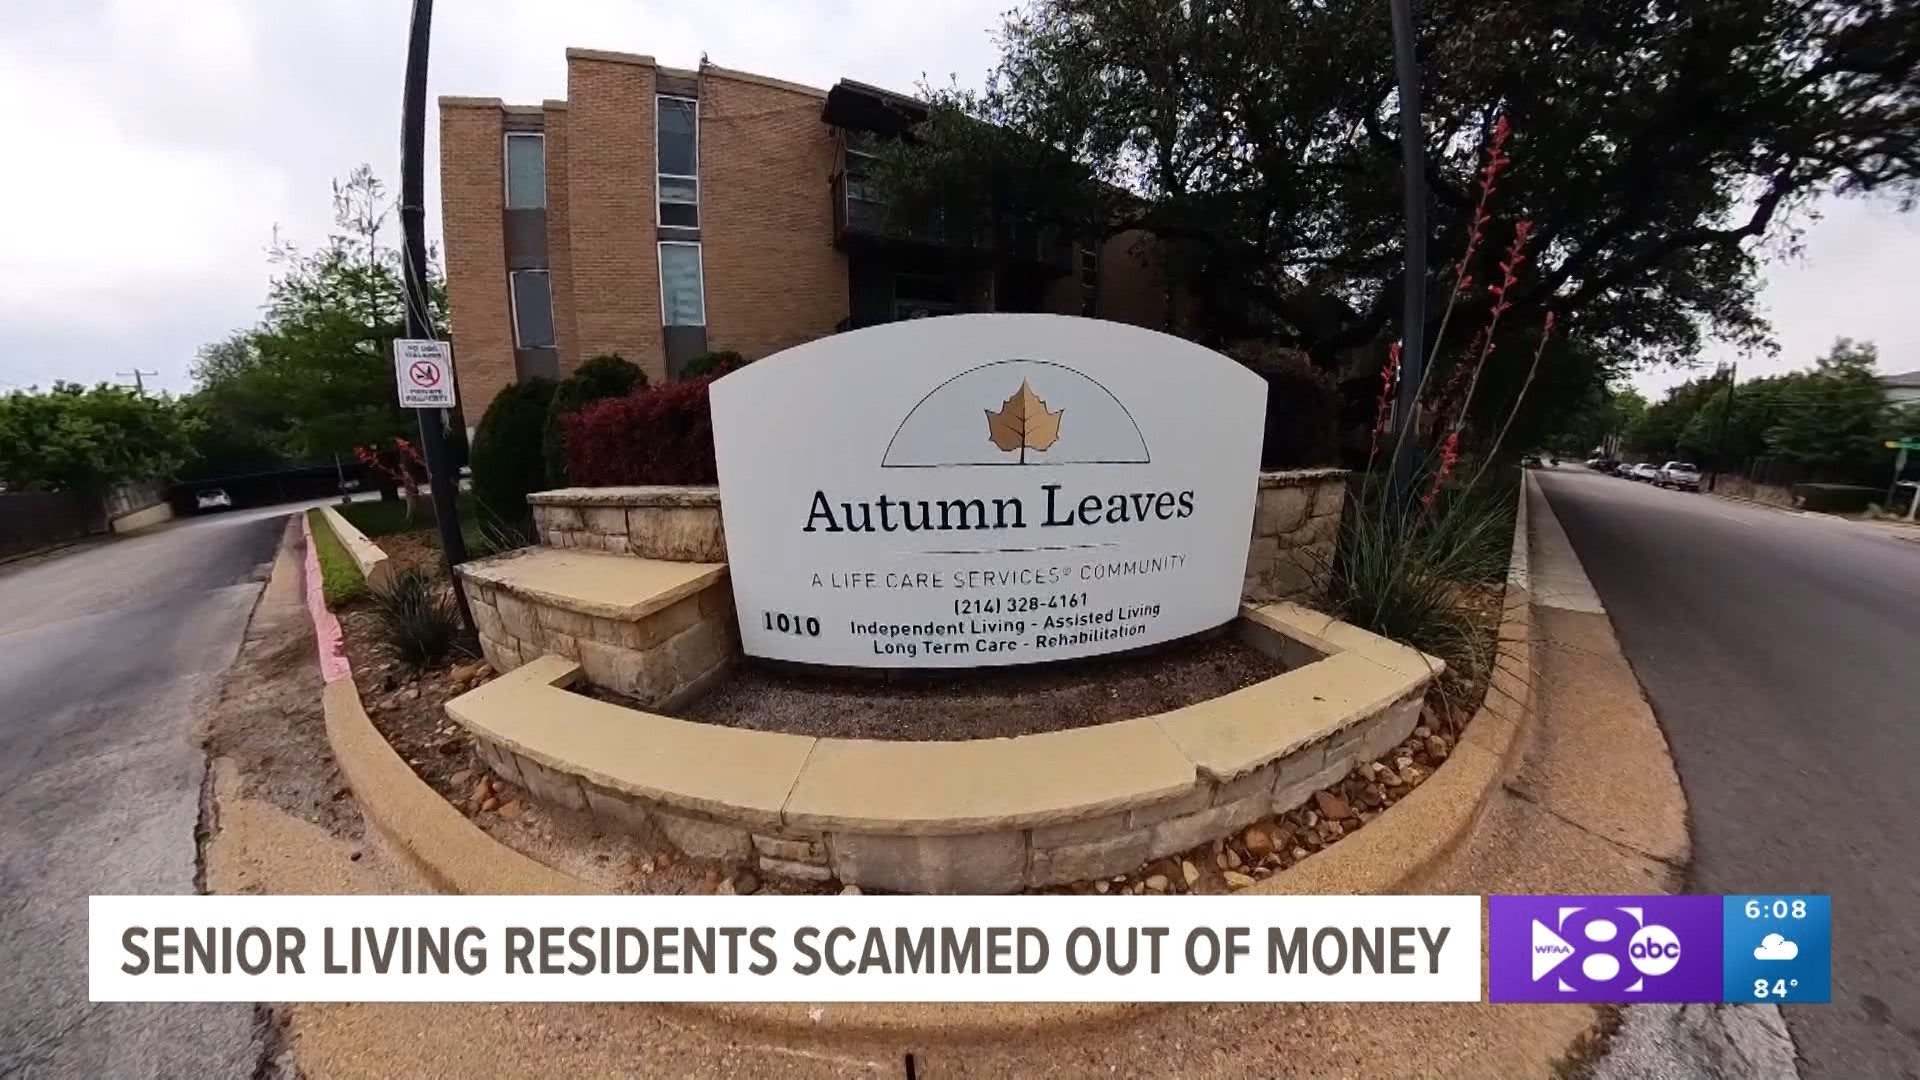 The Autumn Leaves facility near White Rock Lake said it was "shocked and outraged" by the allegation.